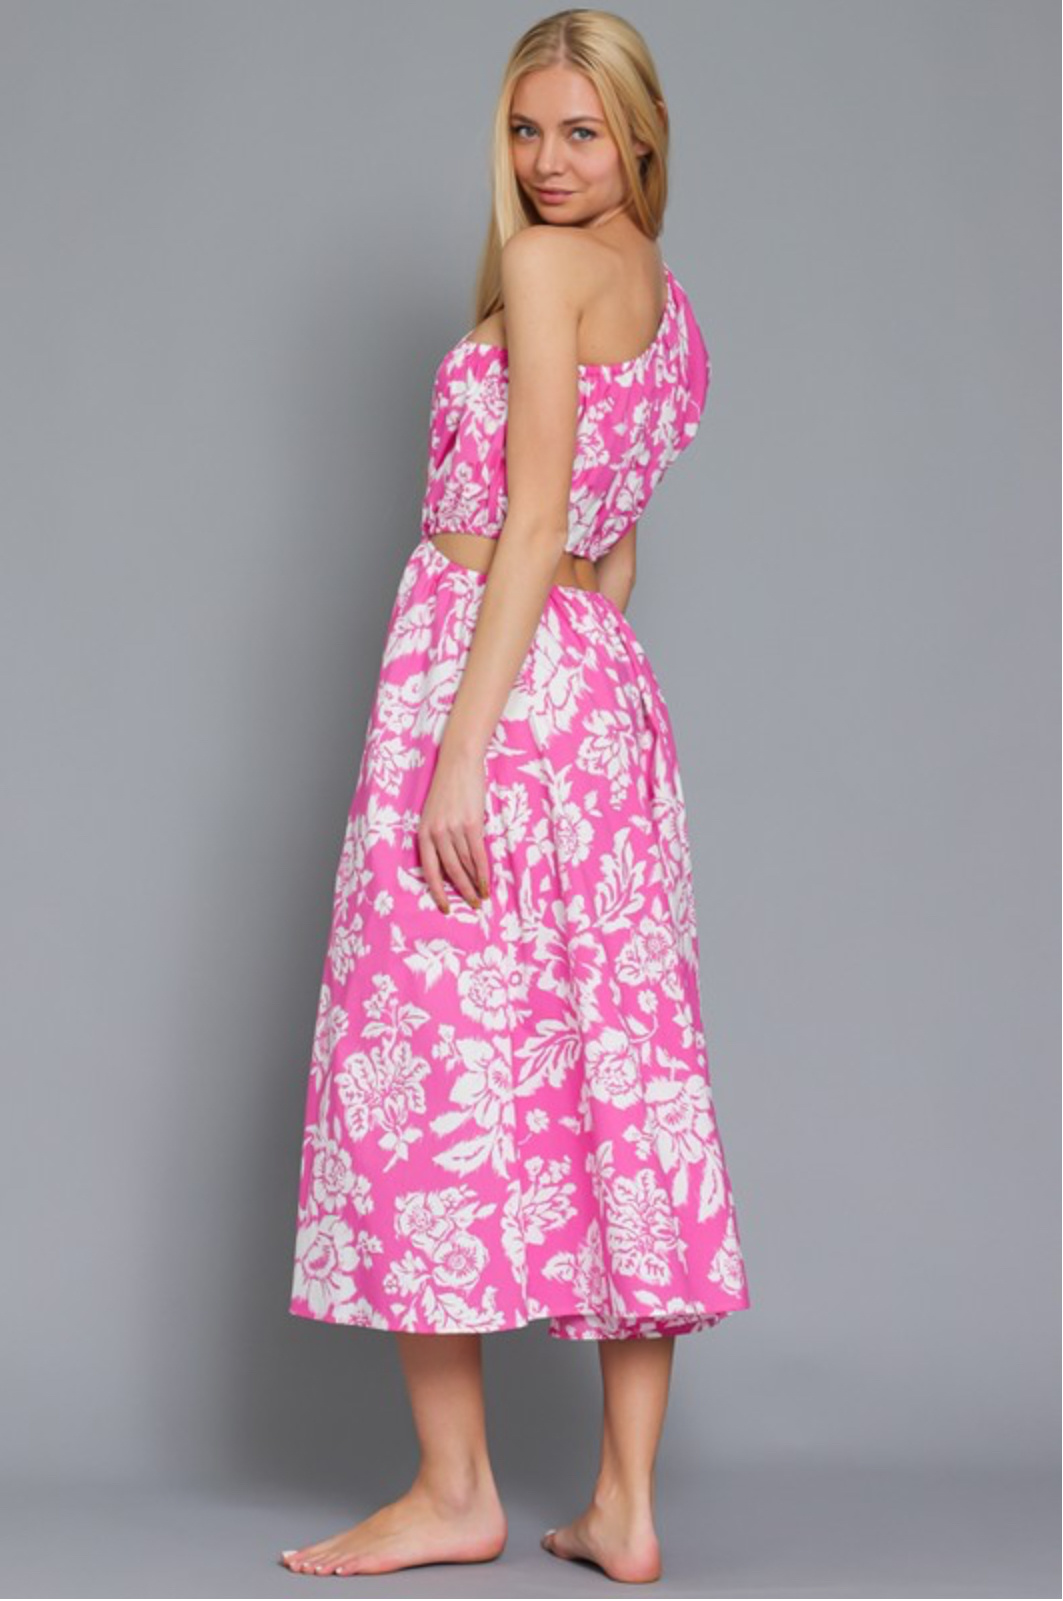 Whisked Away Floral Cut-Out Dress